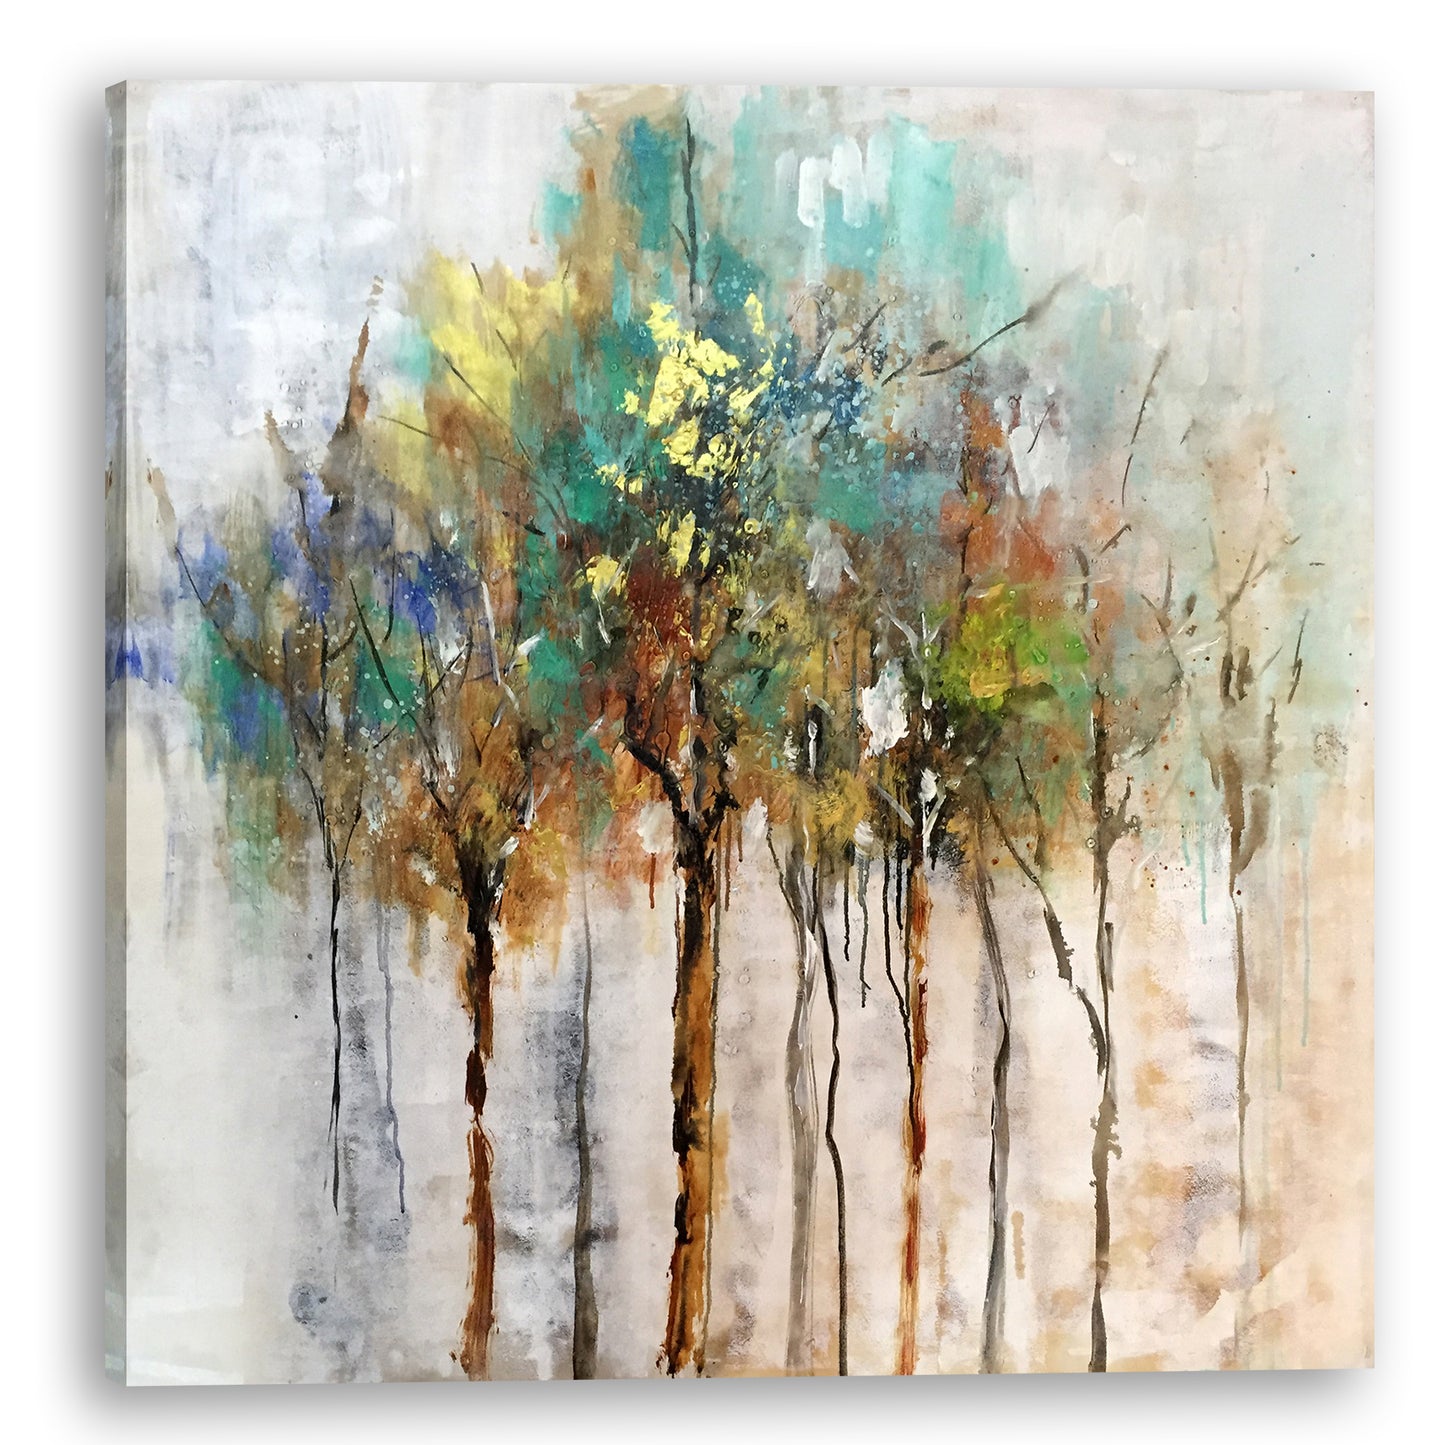 Hand-painted Art "Abstract Forest" Oil painting on canvas original, Wall art for living room, bedroom - Wrapped Canvas Painting